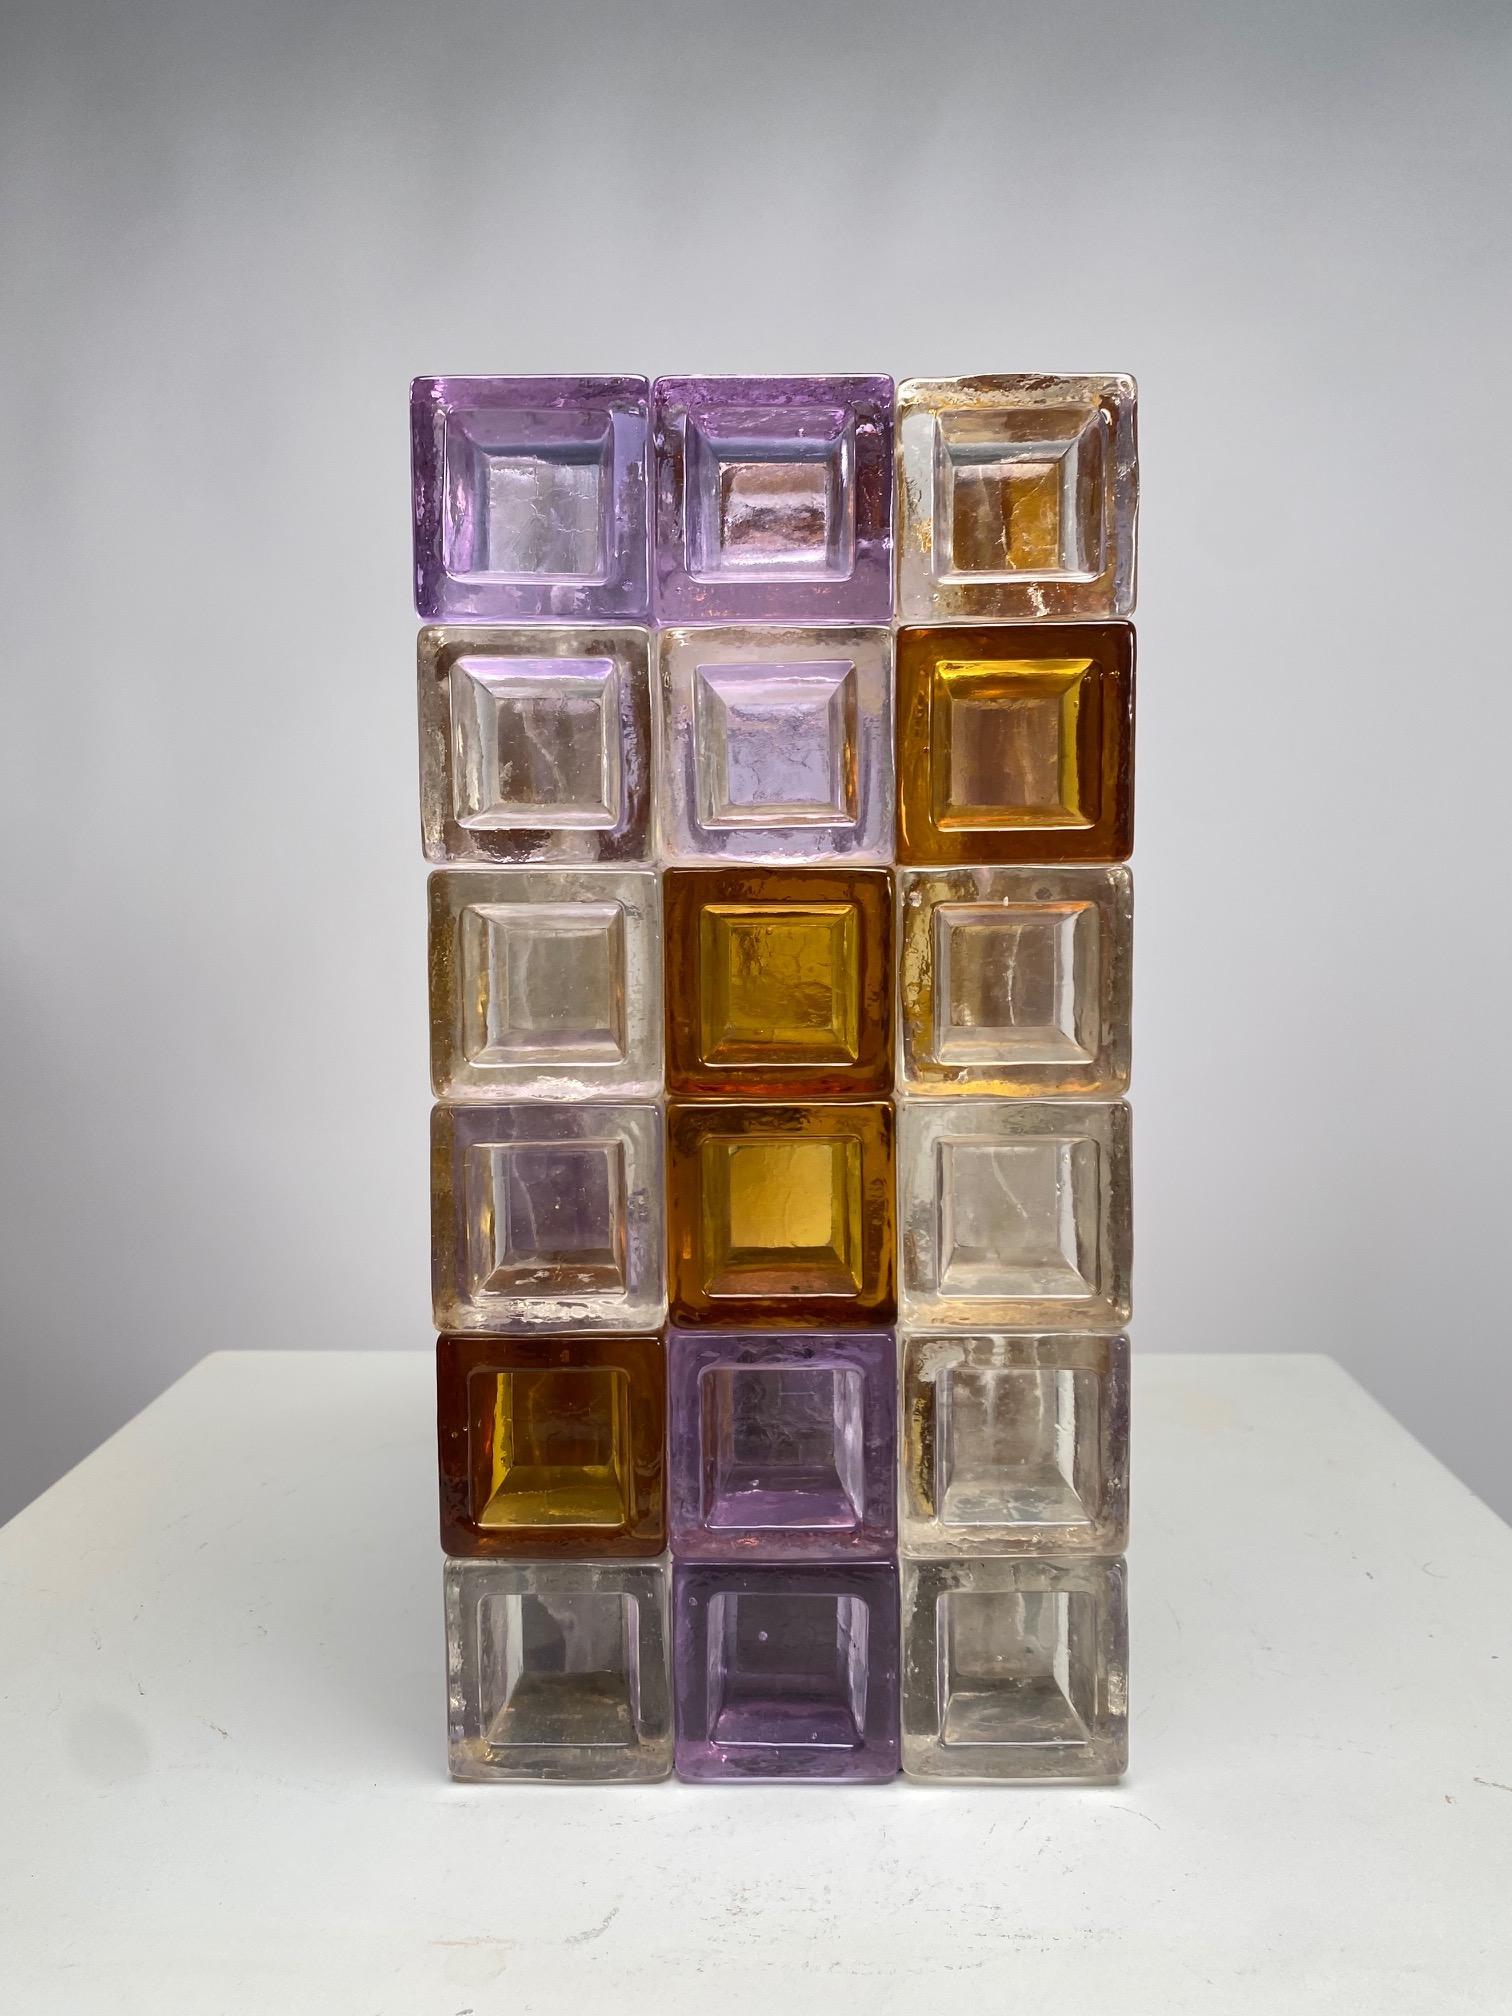 Sculptural Poliarte Table Lamp in Glass Cubes Designed by Albano Poli, Italy 2